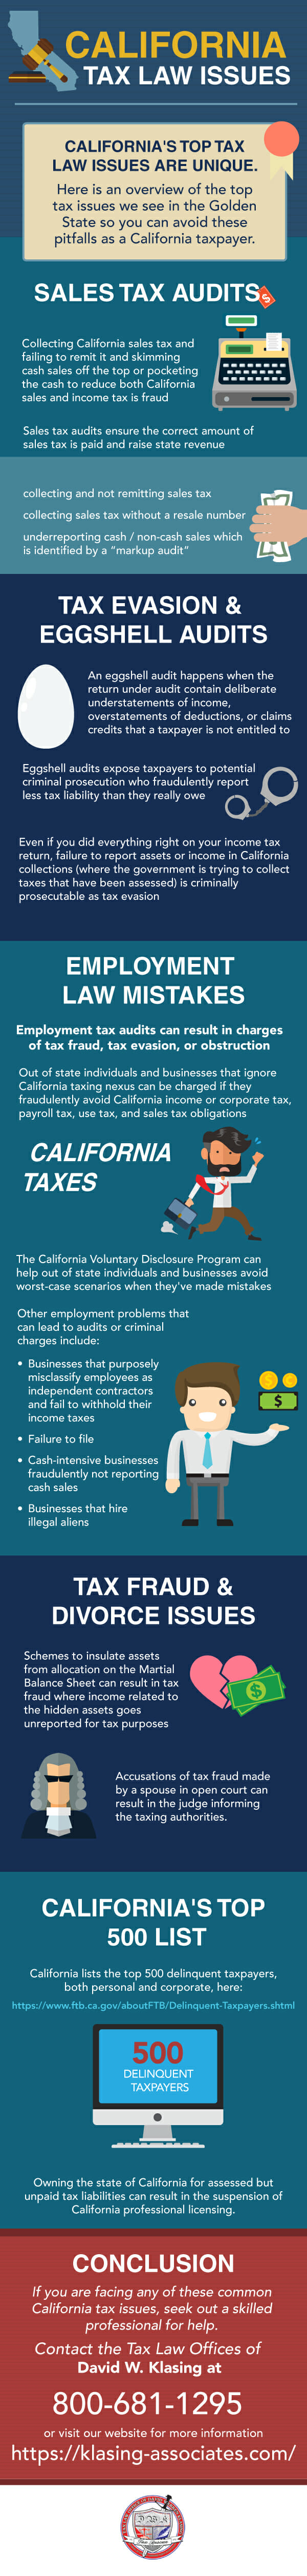 California Tax Law Issues [Infographic]